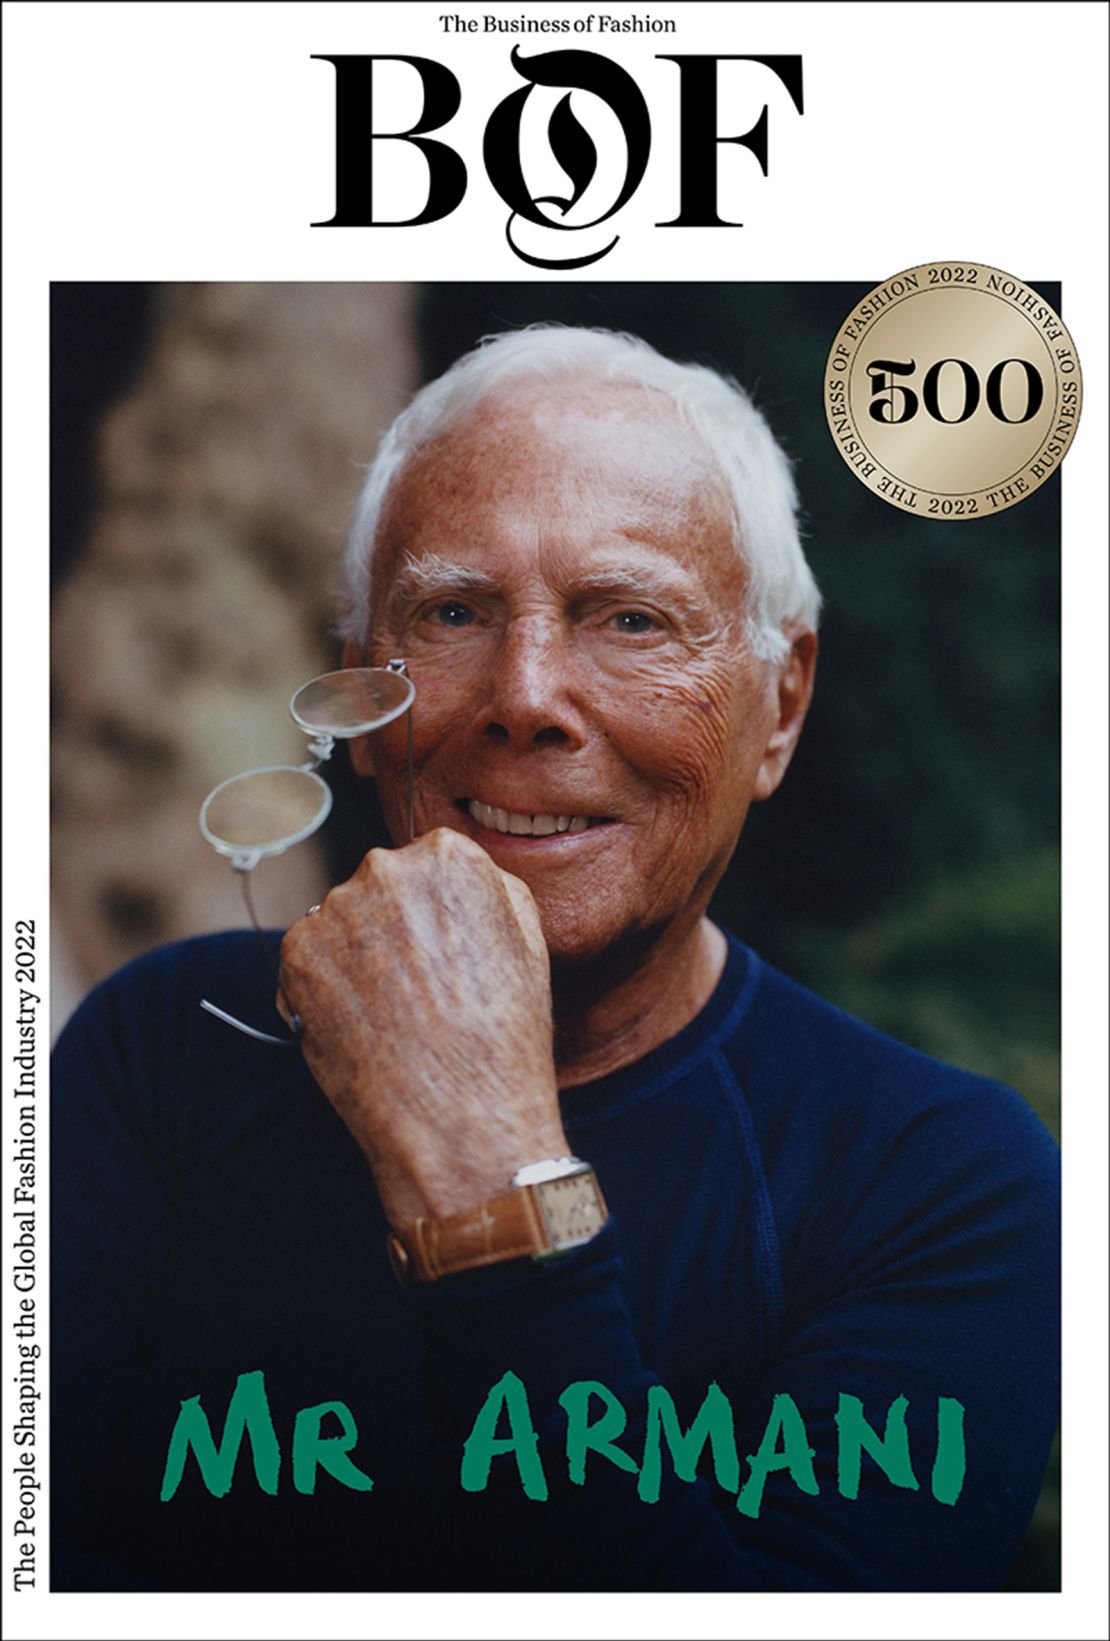 Giorgio Armani has been a member of the BoF 500, a professional index of figures shaping the fashion industry, since 2013.